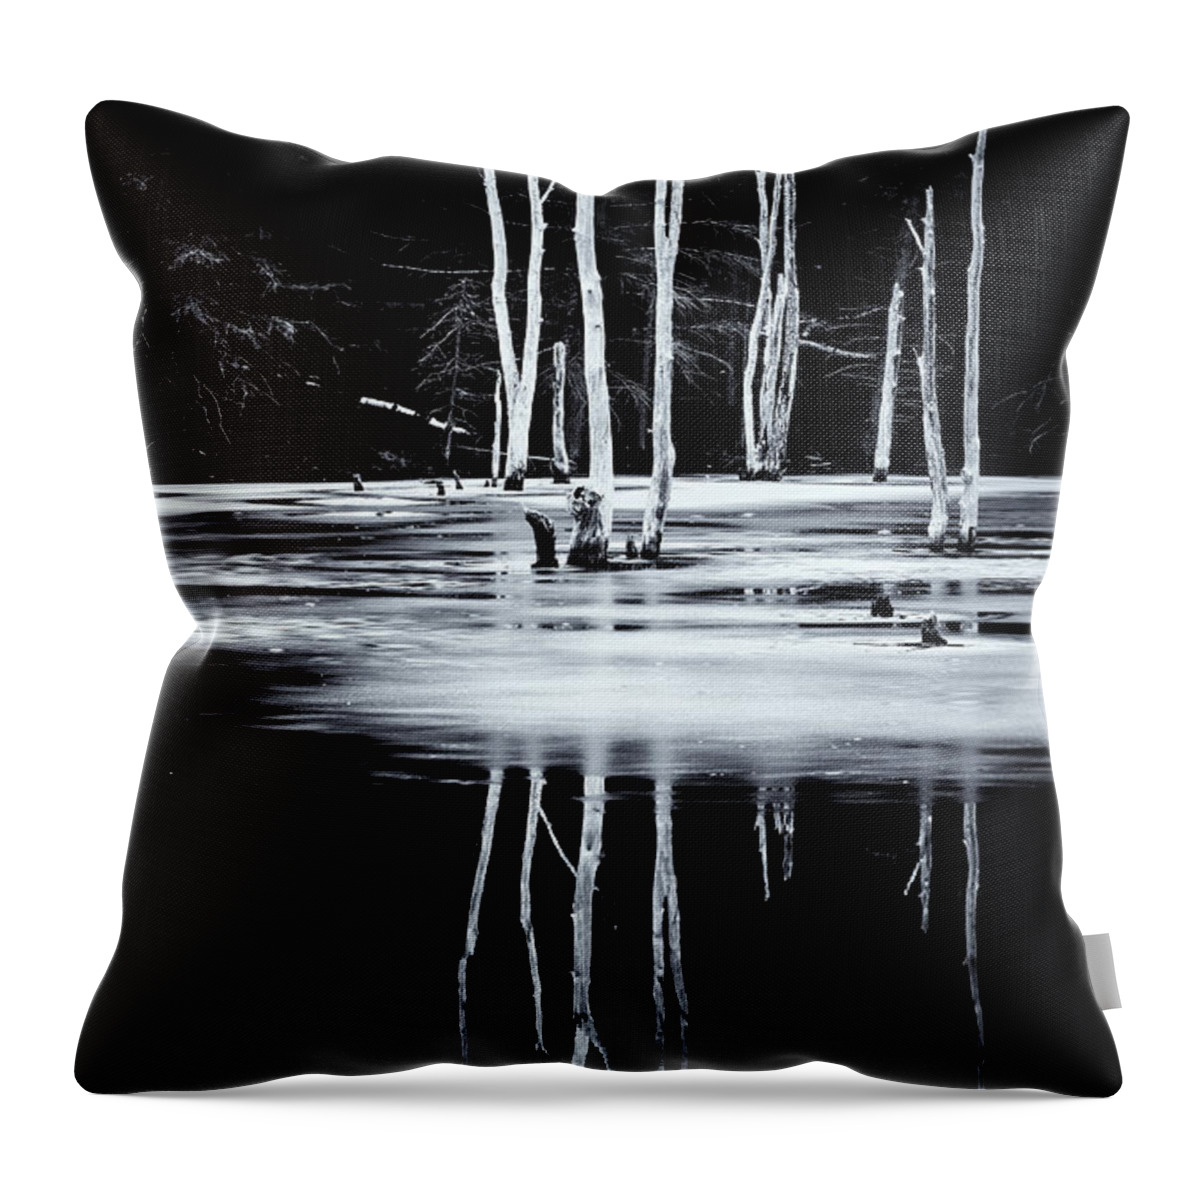 Marlboro Throw Pillow featuring the photograph Black And White Winter Thaw Relections by Tom Singleton